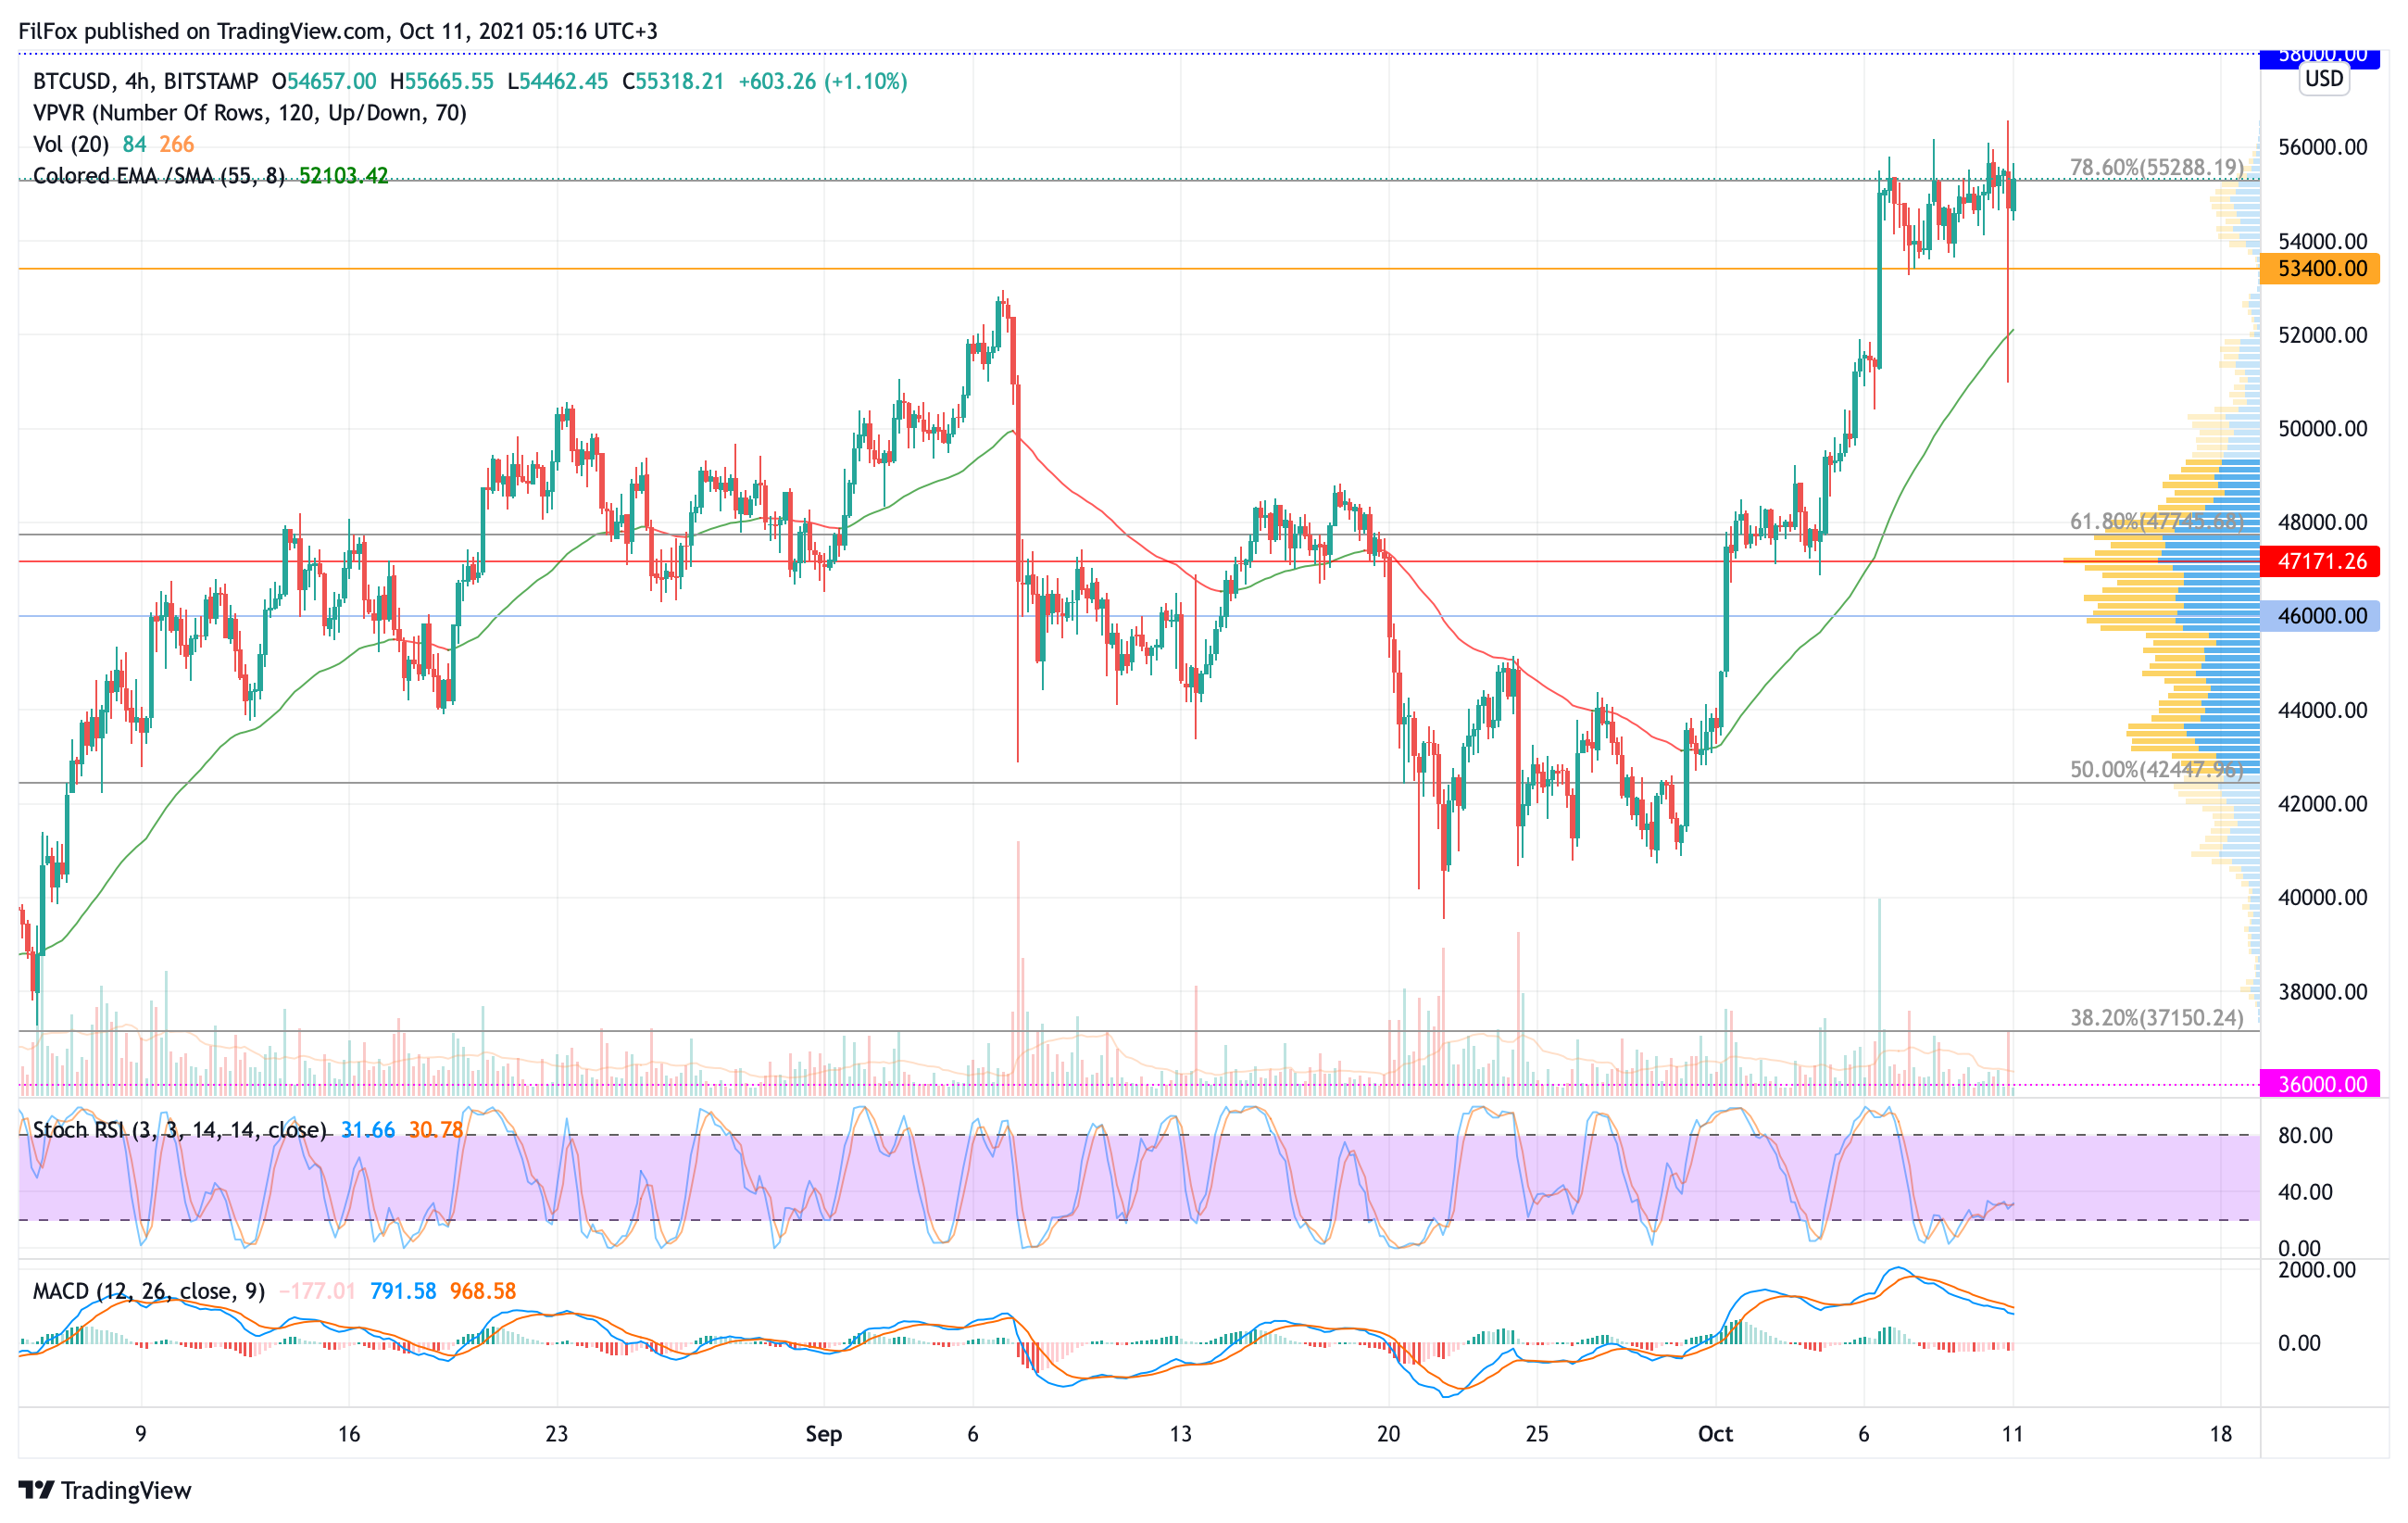 Analysis of prices for Bitcoin, Ethereum, XRP for 10/11/2021